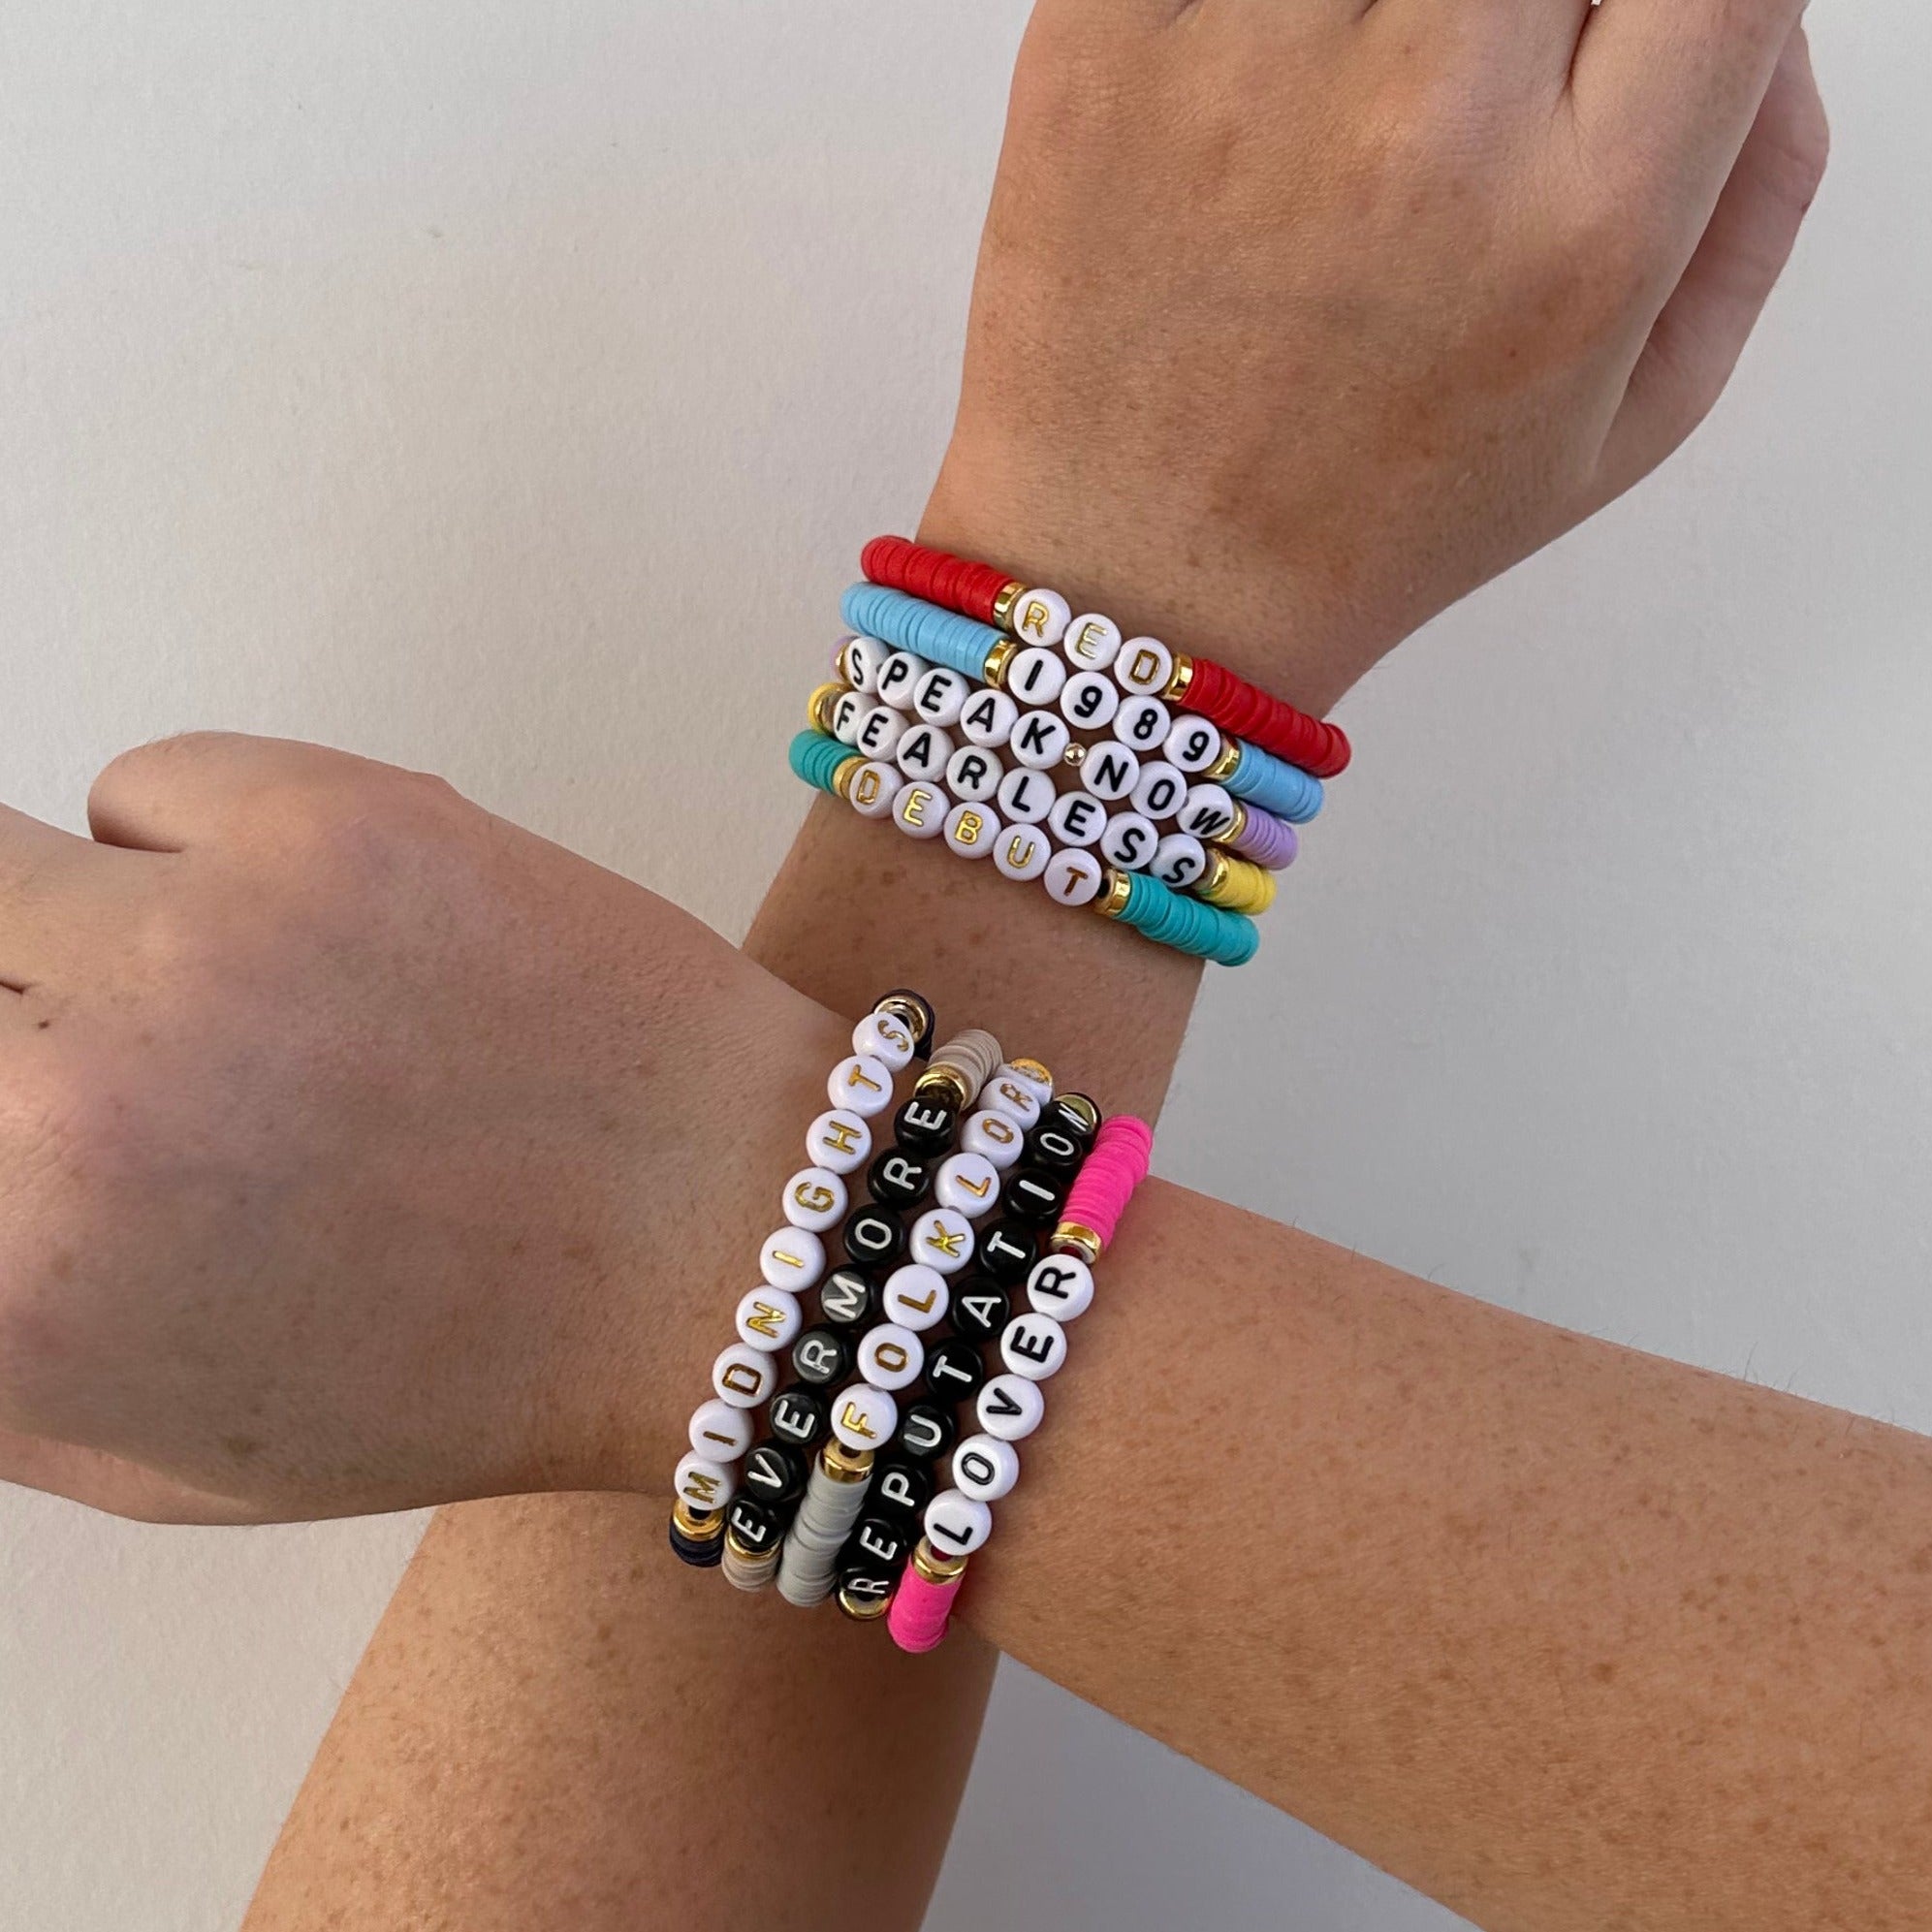 how to make friendship bands with beads